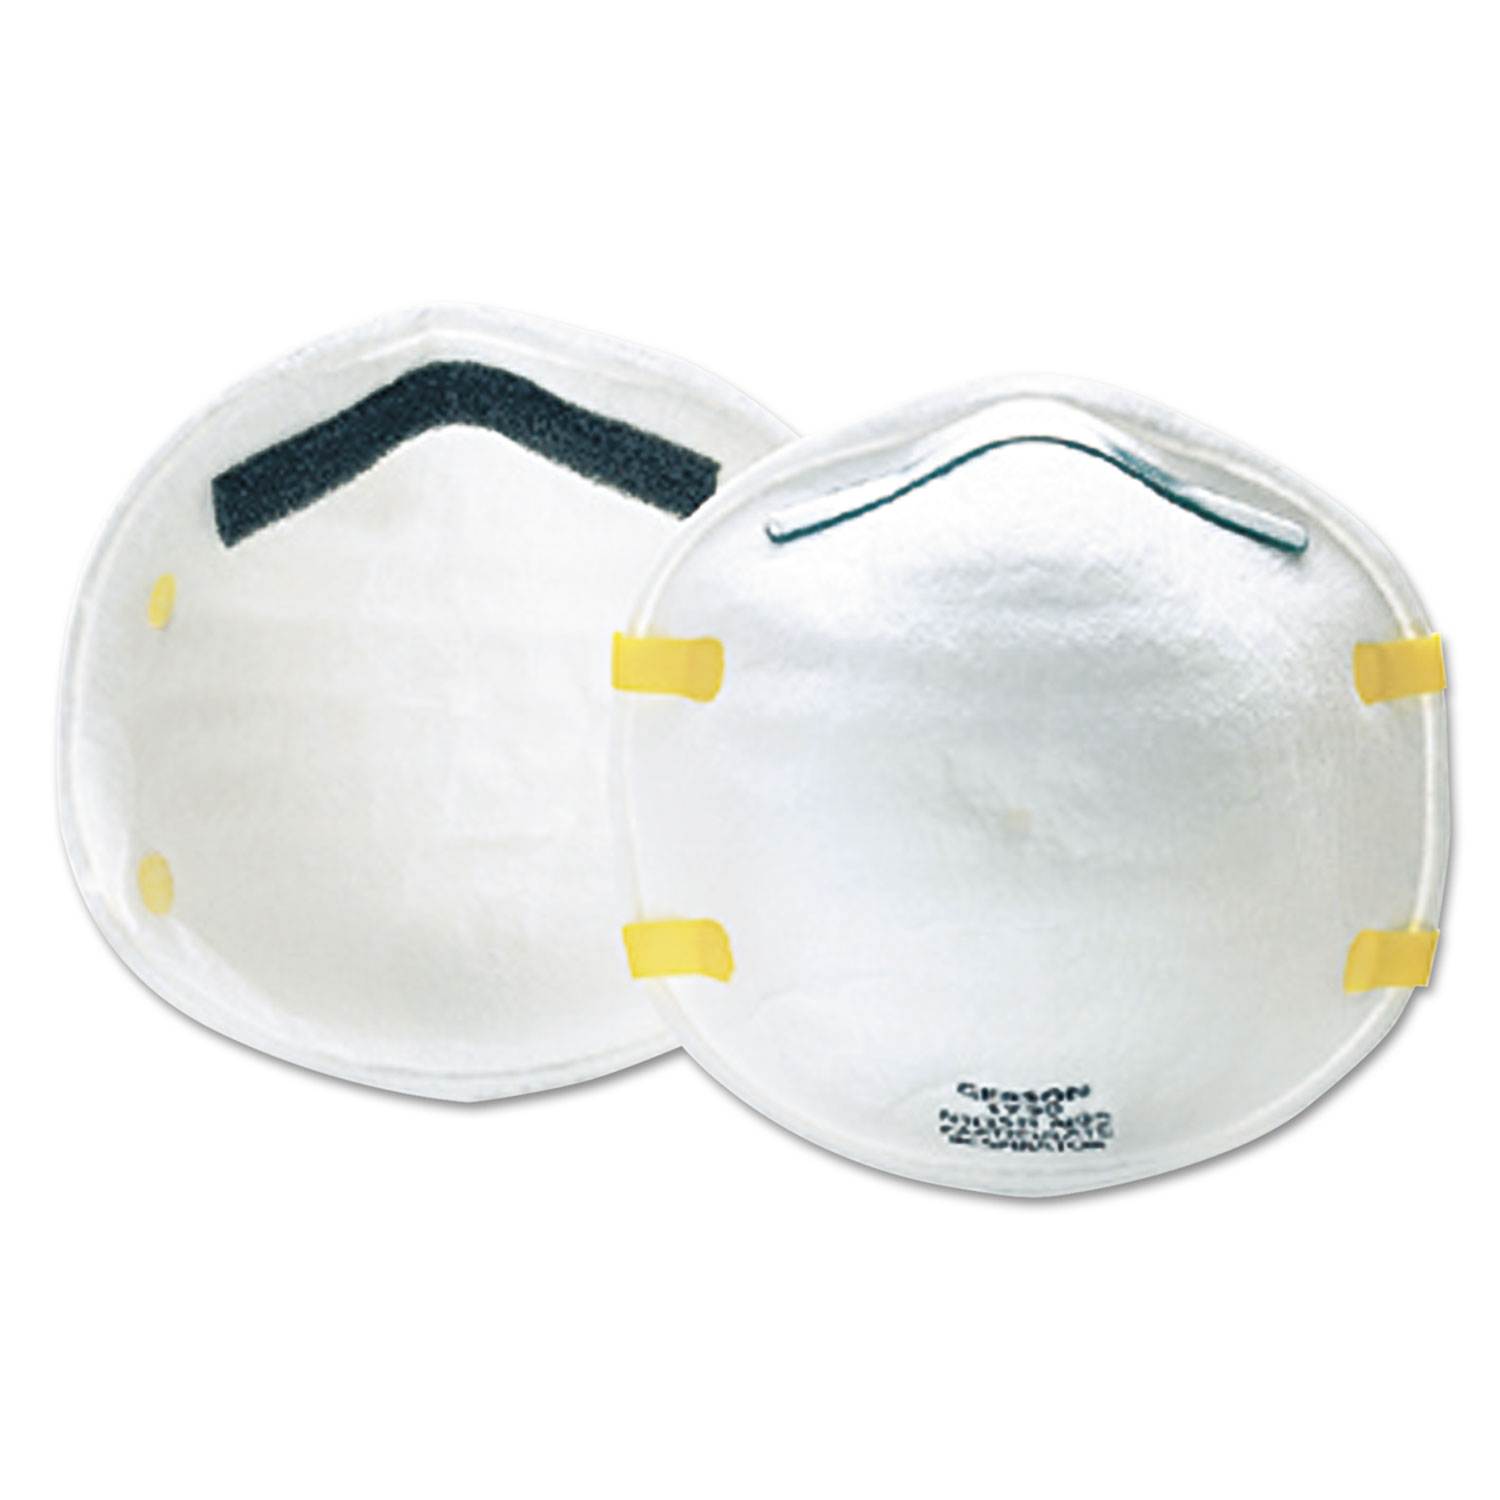  Gerson 1730 Cup-Style Particulate Respirator, N95, 20/Box (GSN1730) 